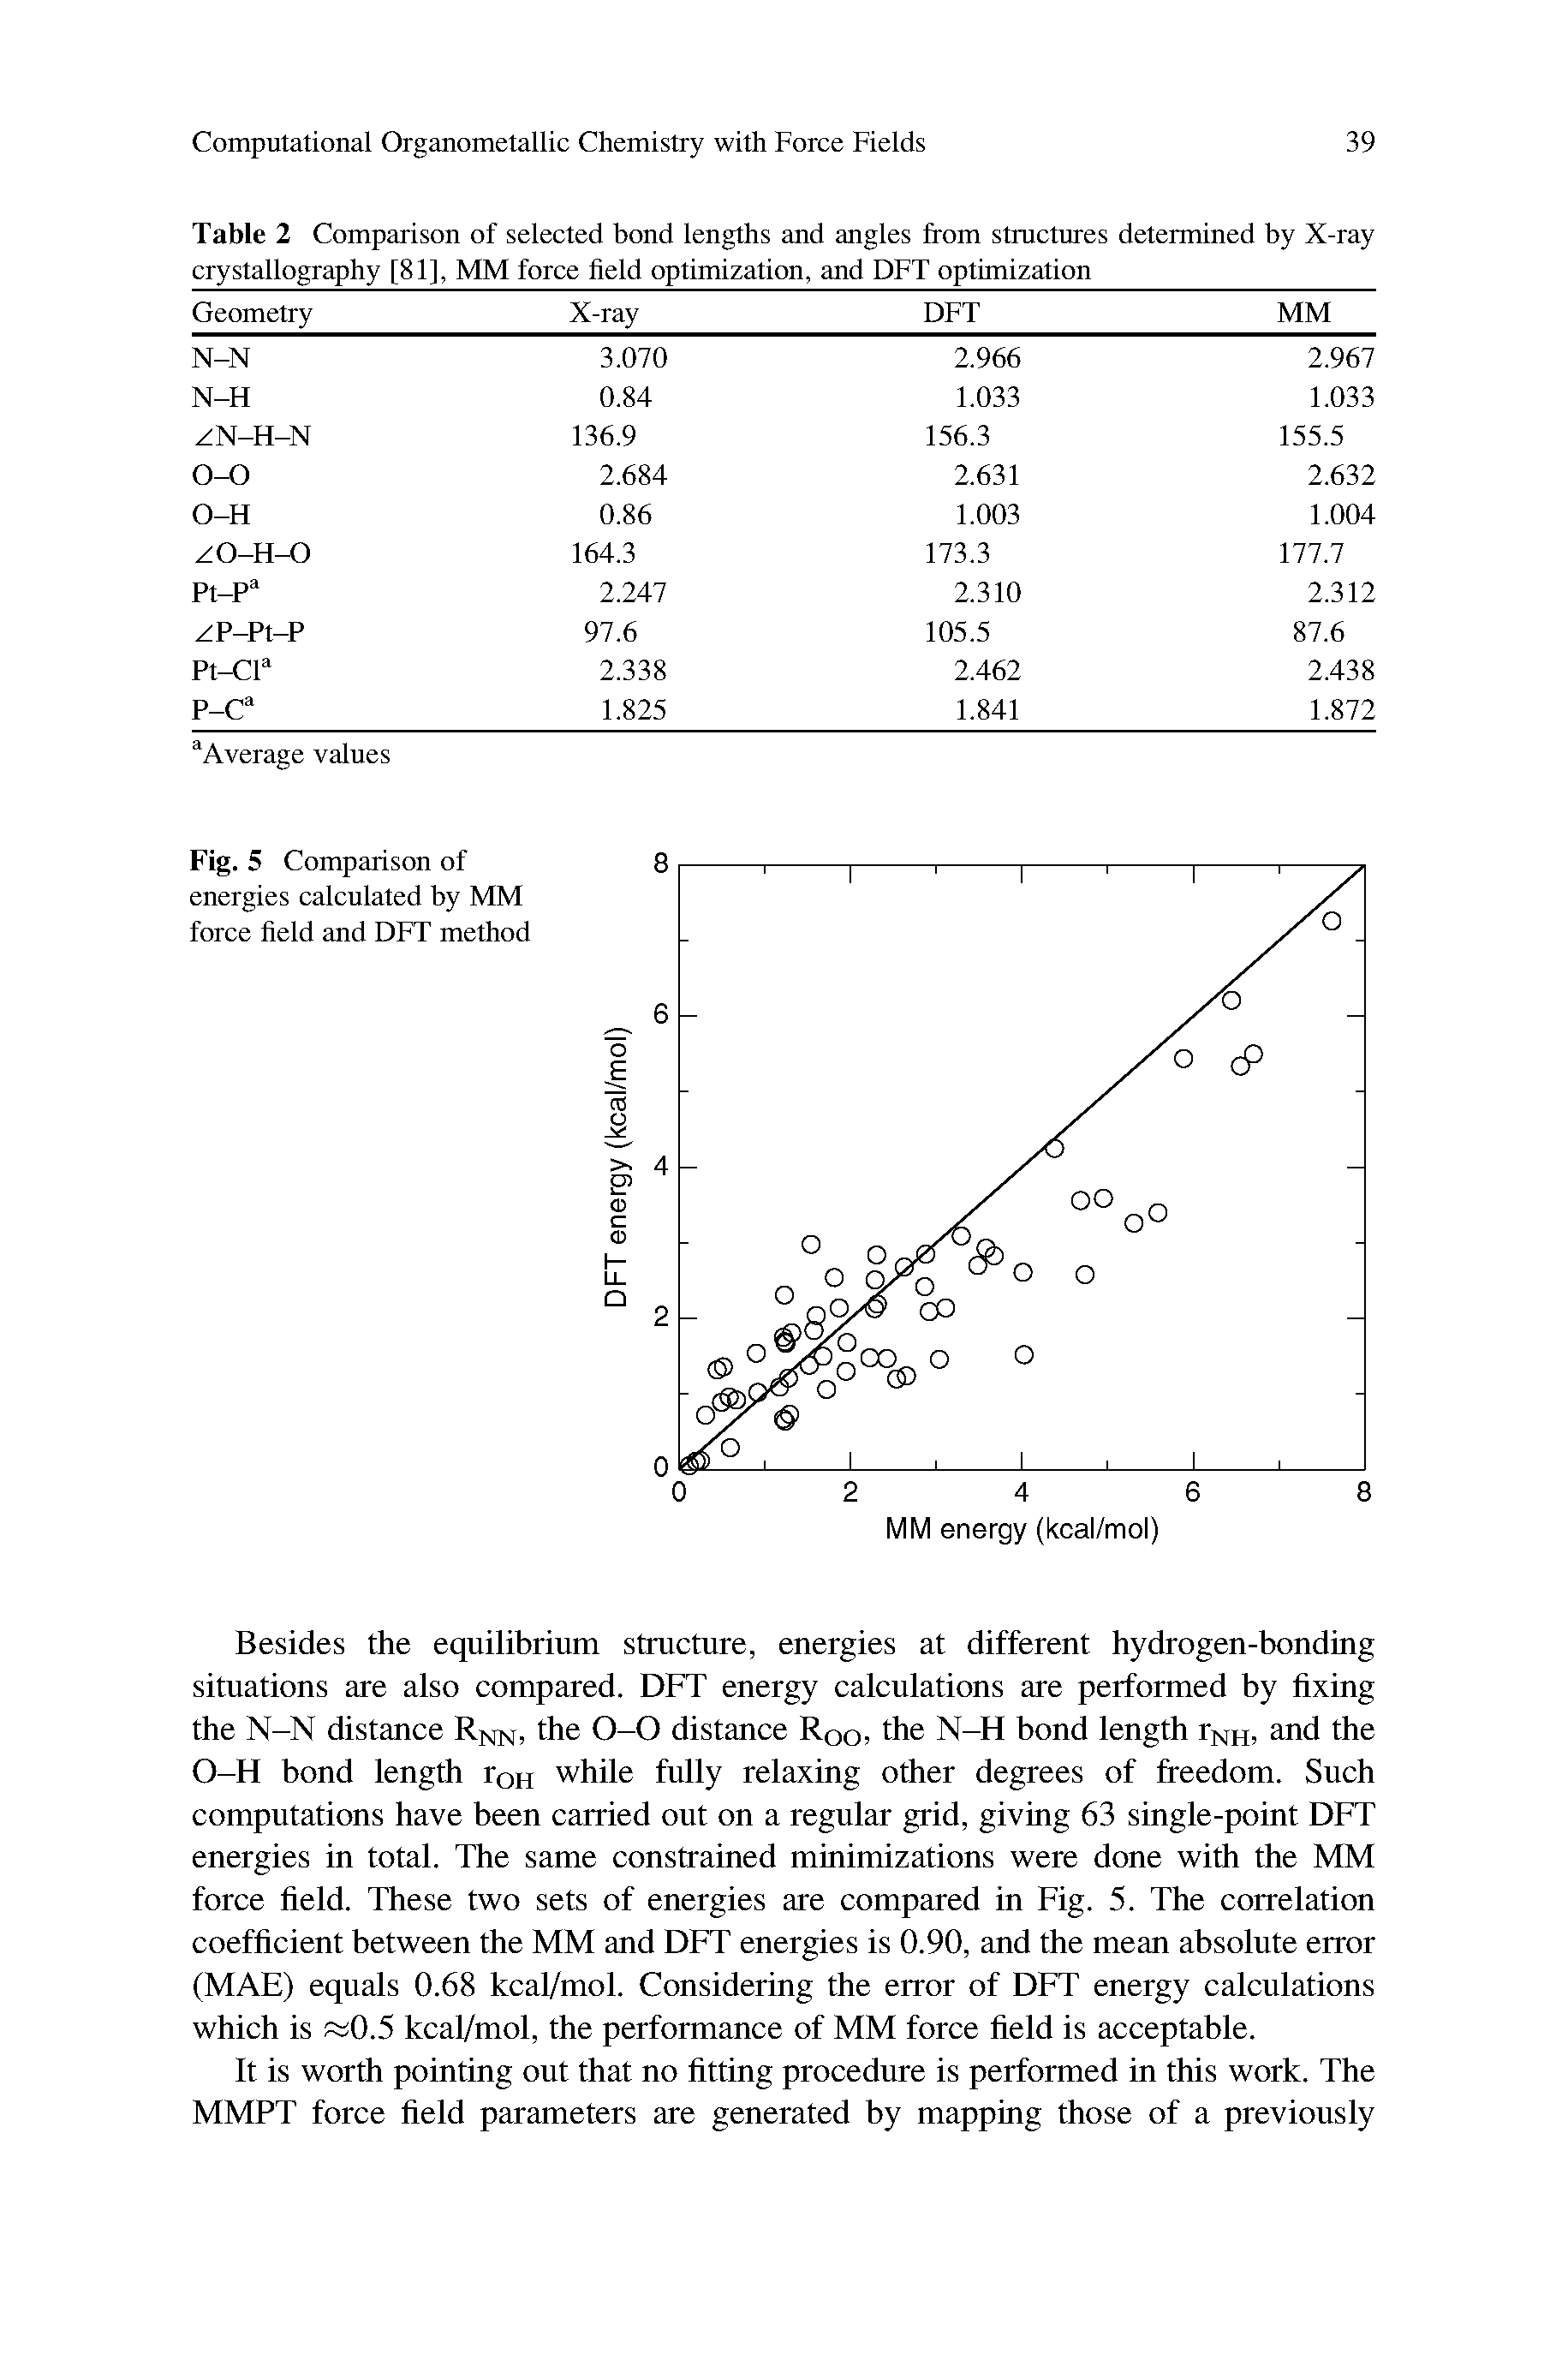 Table 2 Comparison of selected bond lengths and angles from structures determined by X-ray crystallography [81], MM force field optimization, and DFT optimization...